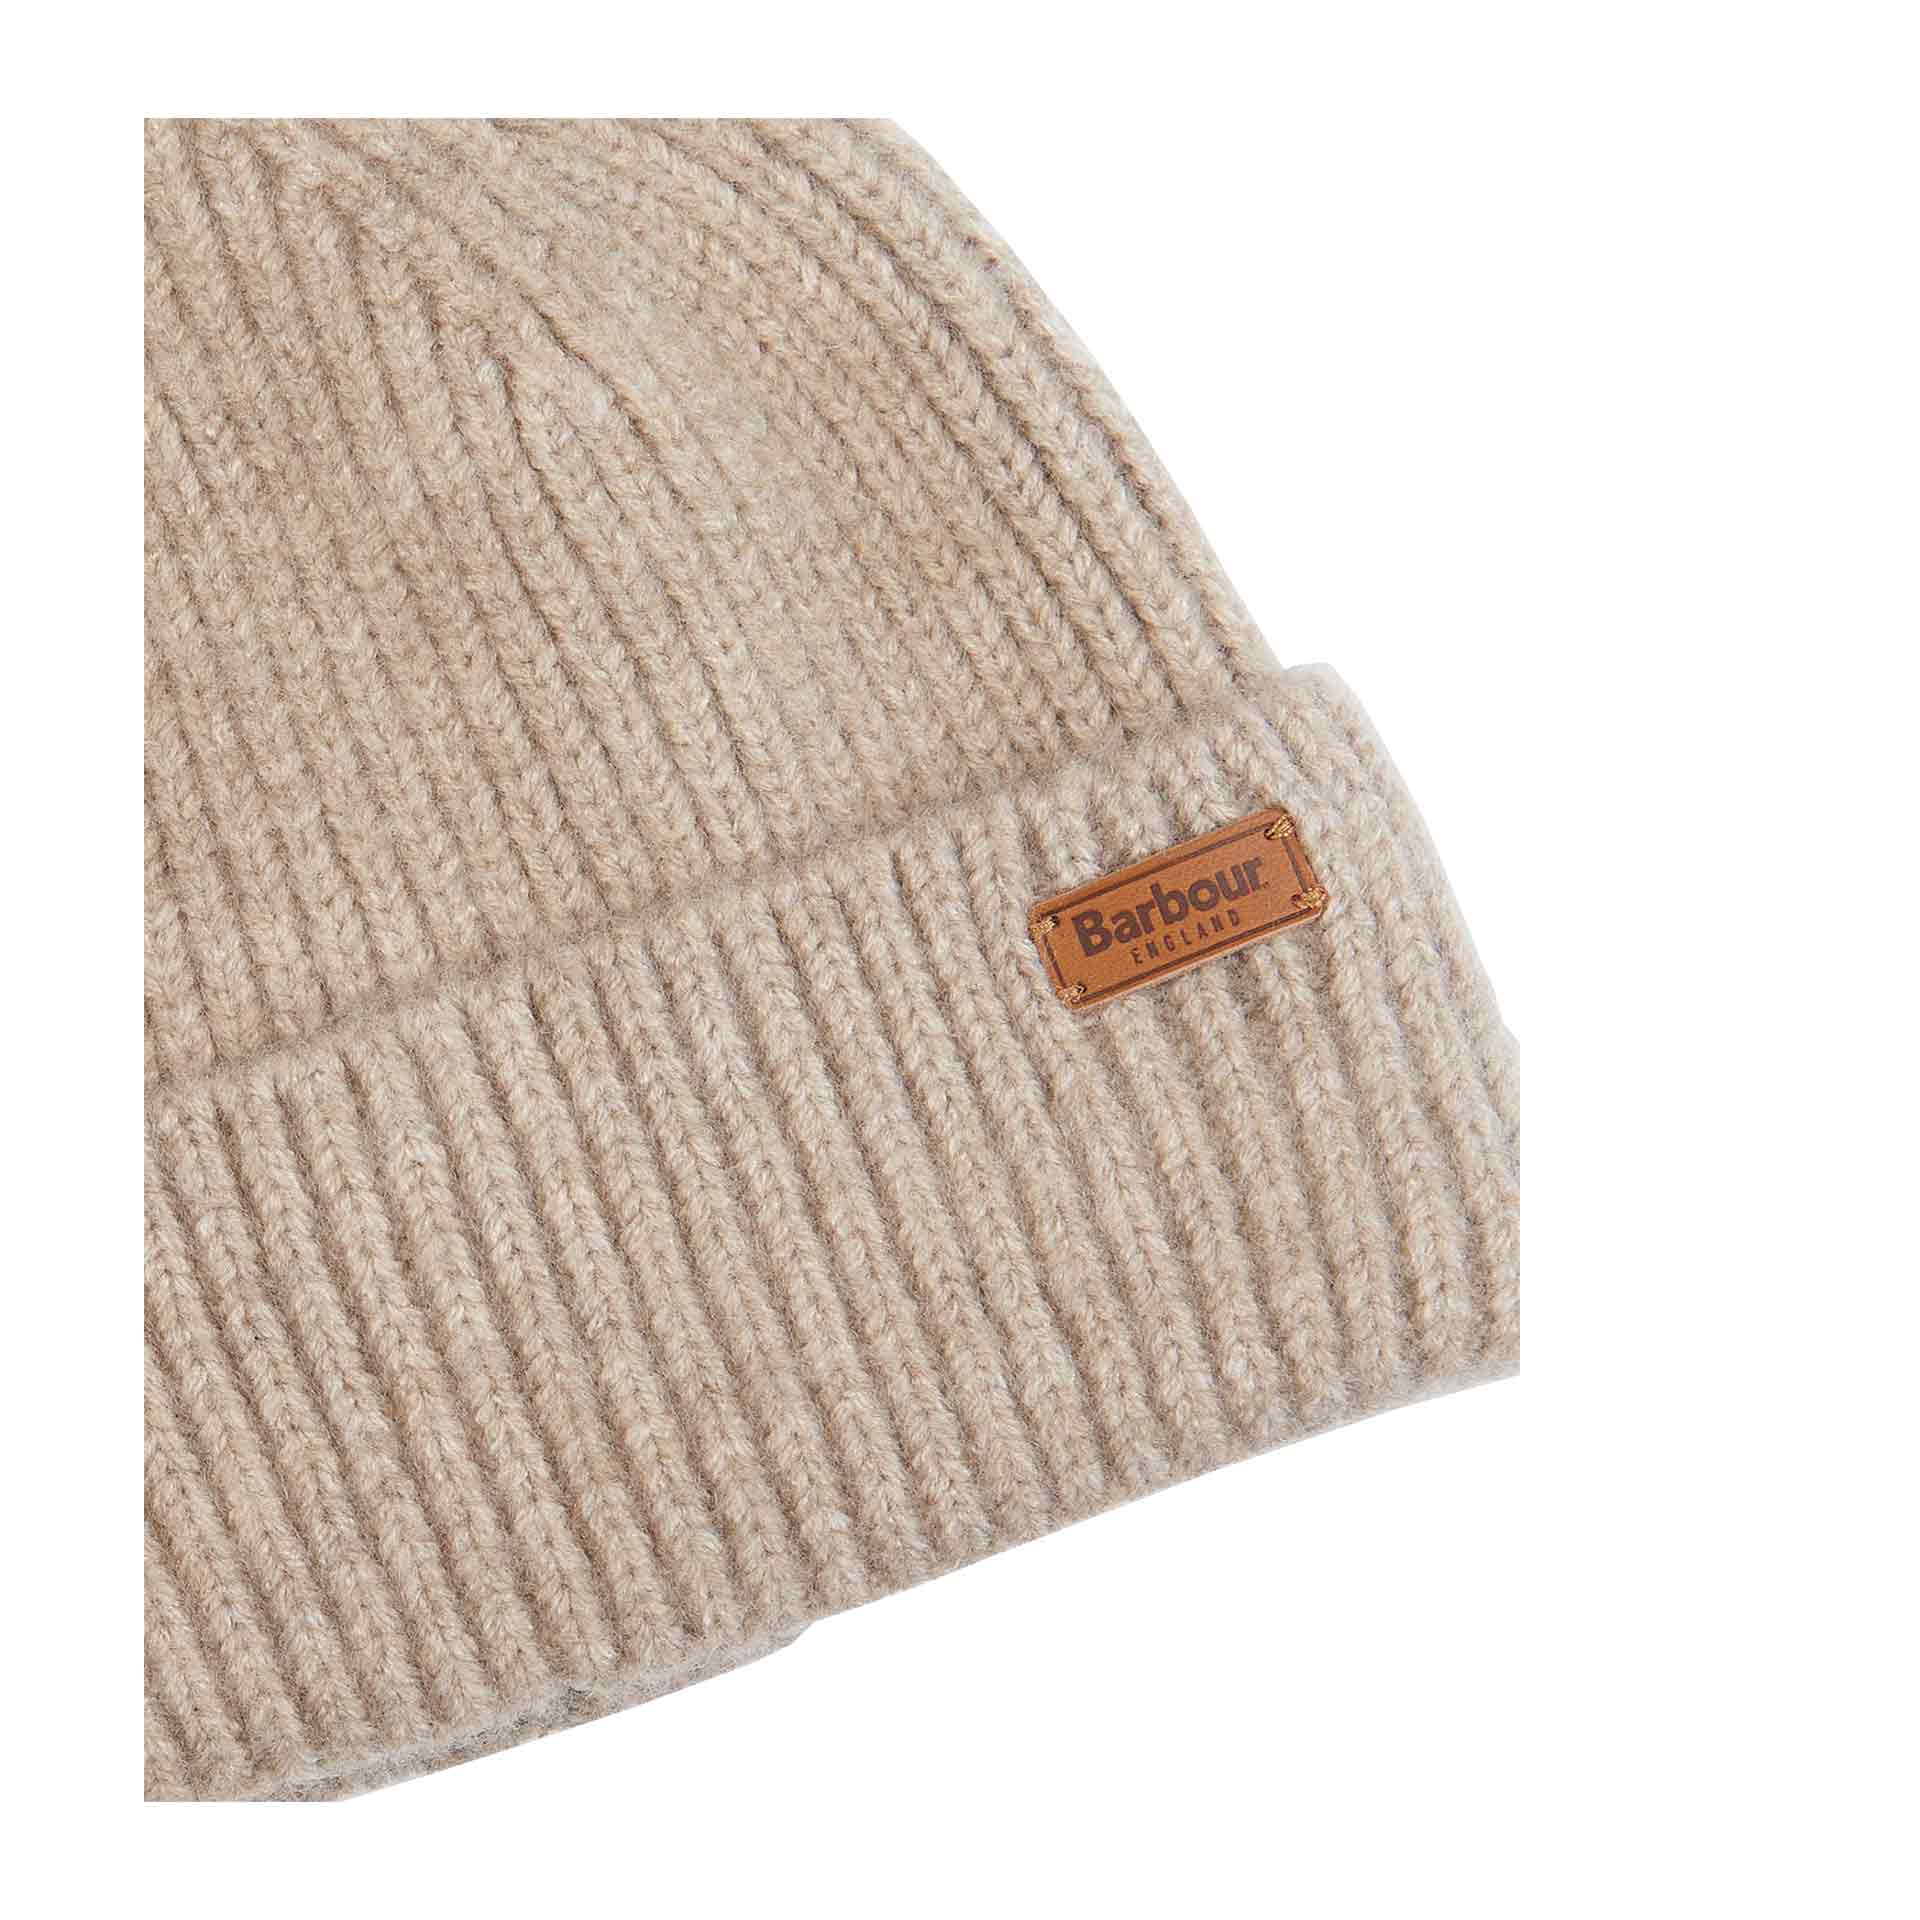 Barbour Beanie Pendle light trench